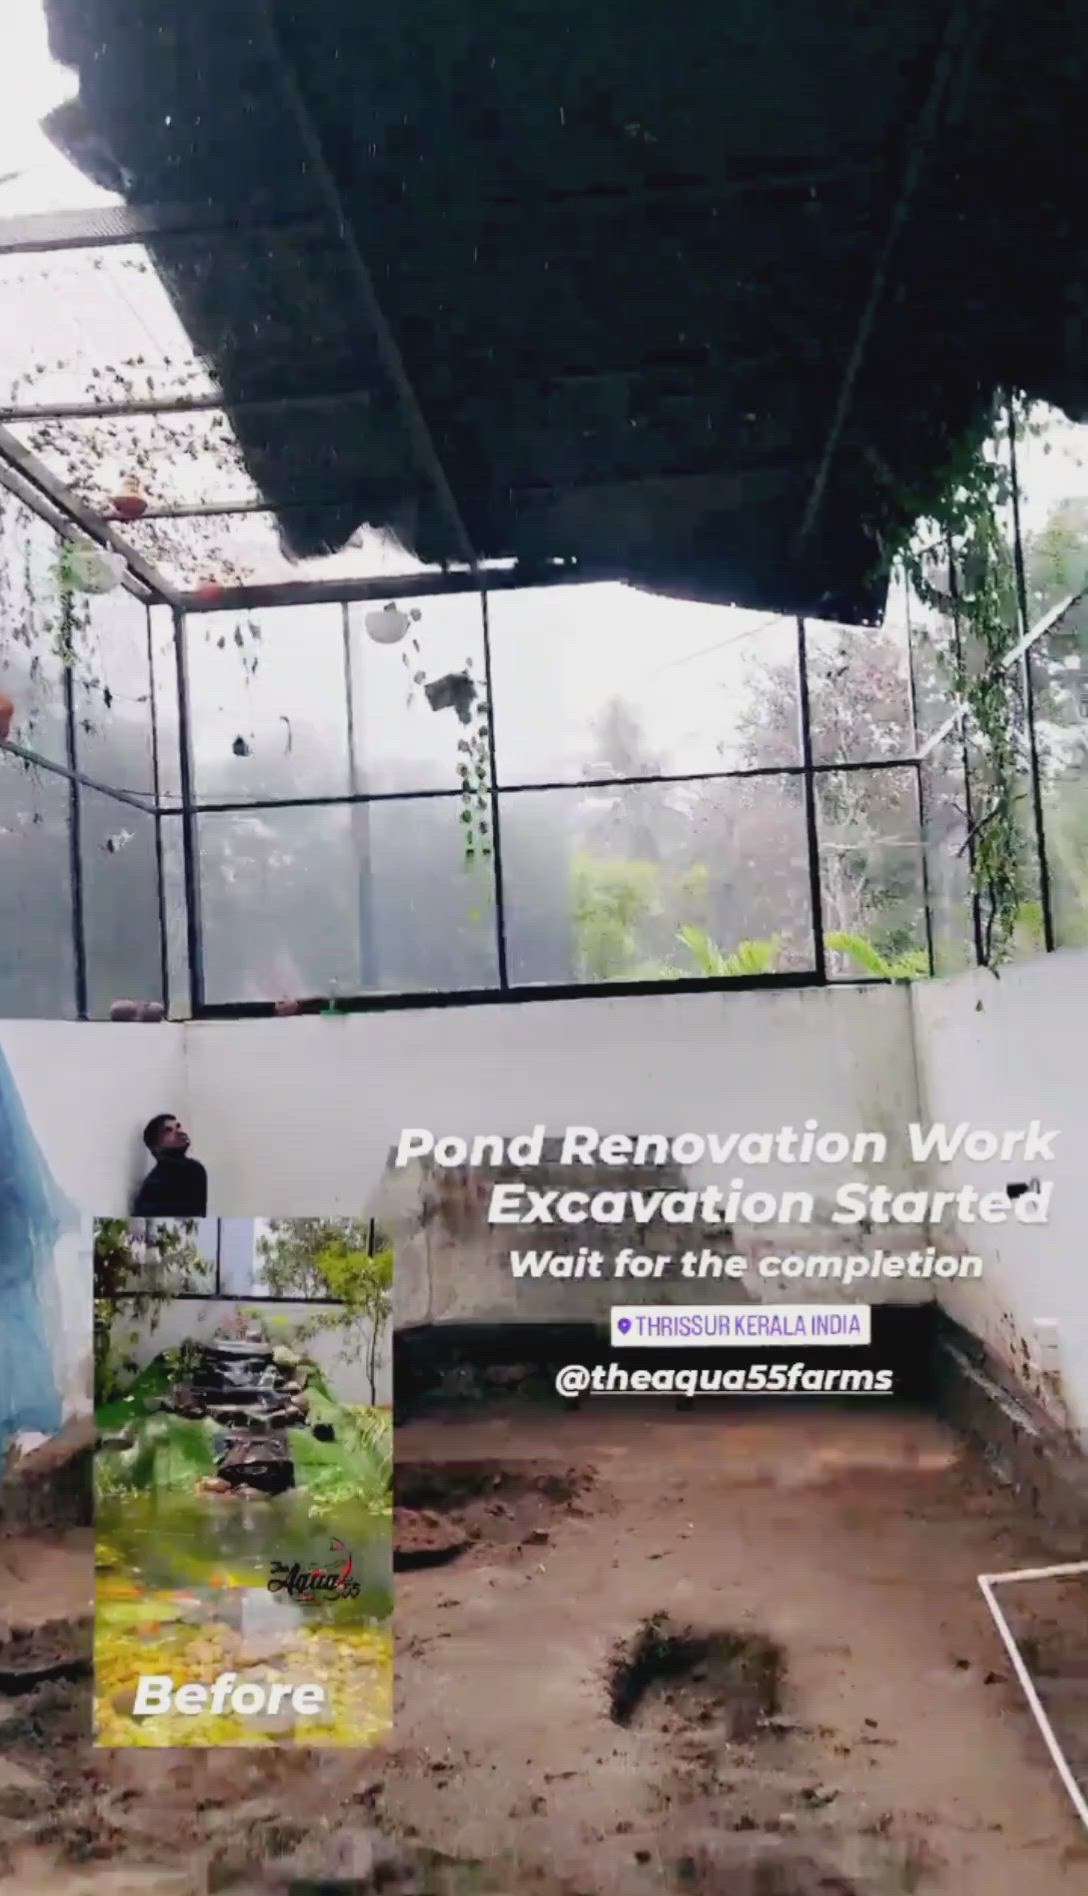 Koi pond renovation work started for our Thrissur Client. Traditional Style pond will be constructed inside this beautiful aviary with birds. 
8547483891 | 9061783891
info@theaqua55farms.com | www.theaqua55farms.com 

 #koifish  #koifishpond #koipond #fishtank #aquarium #filtration #renovation